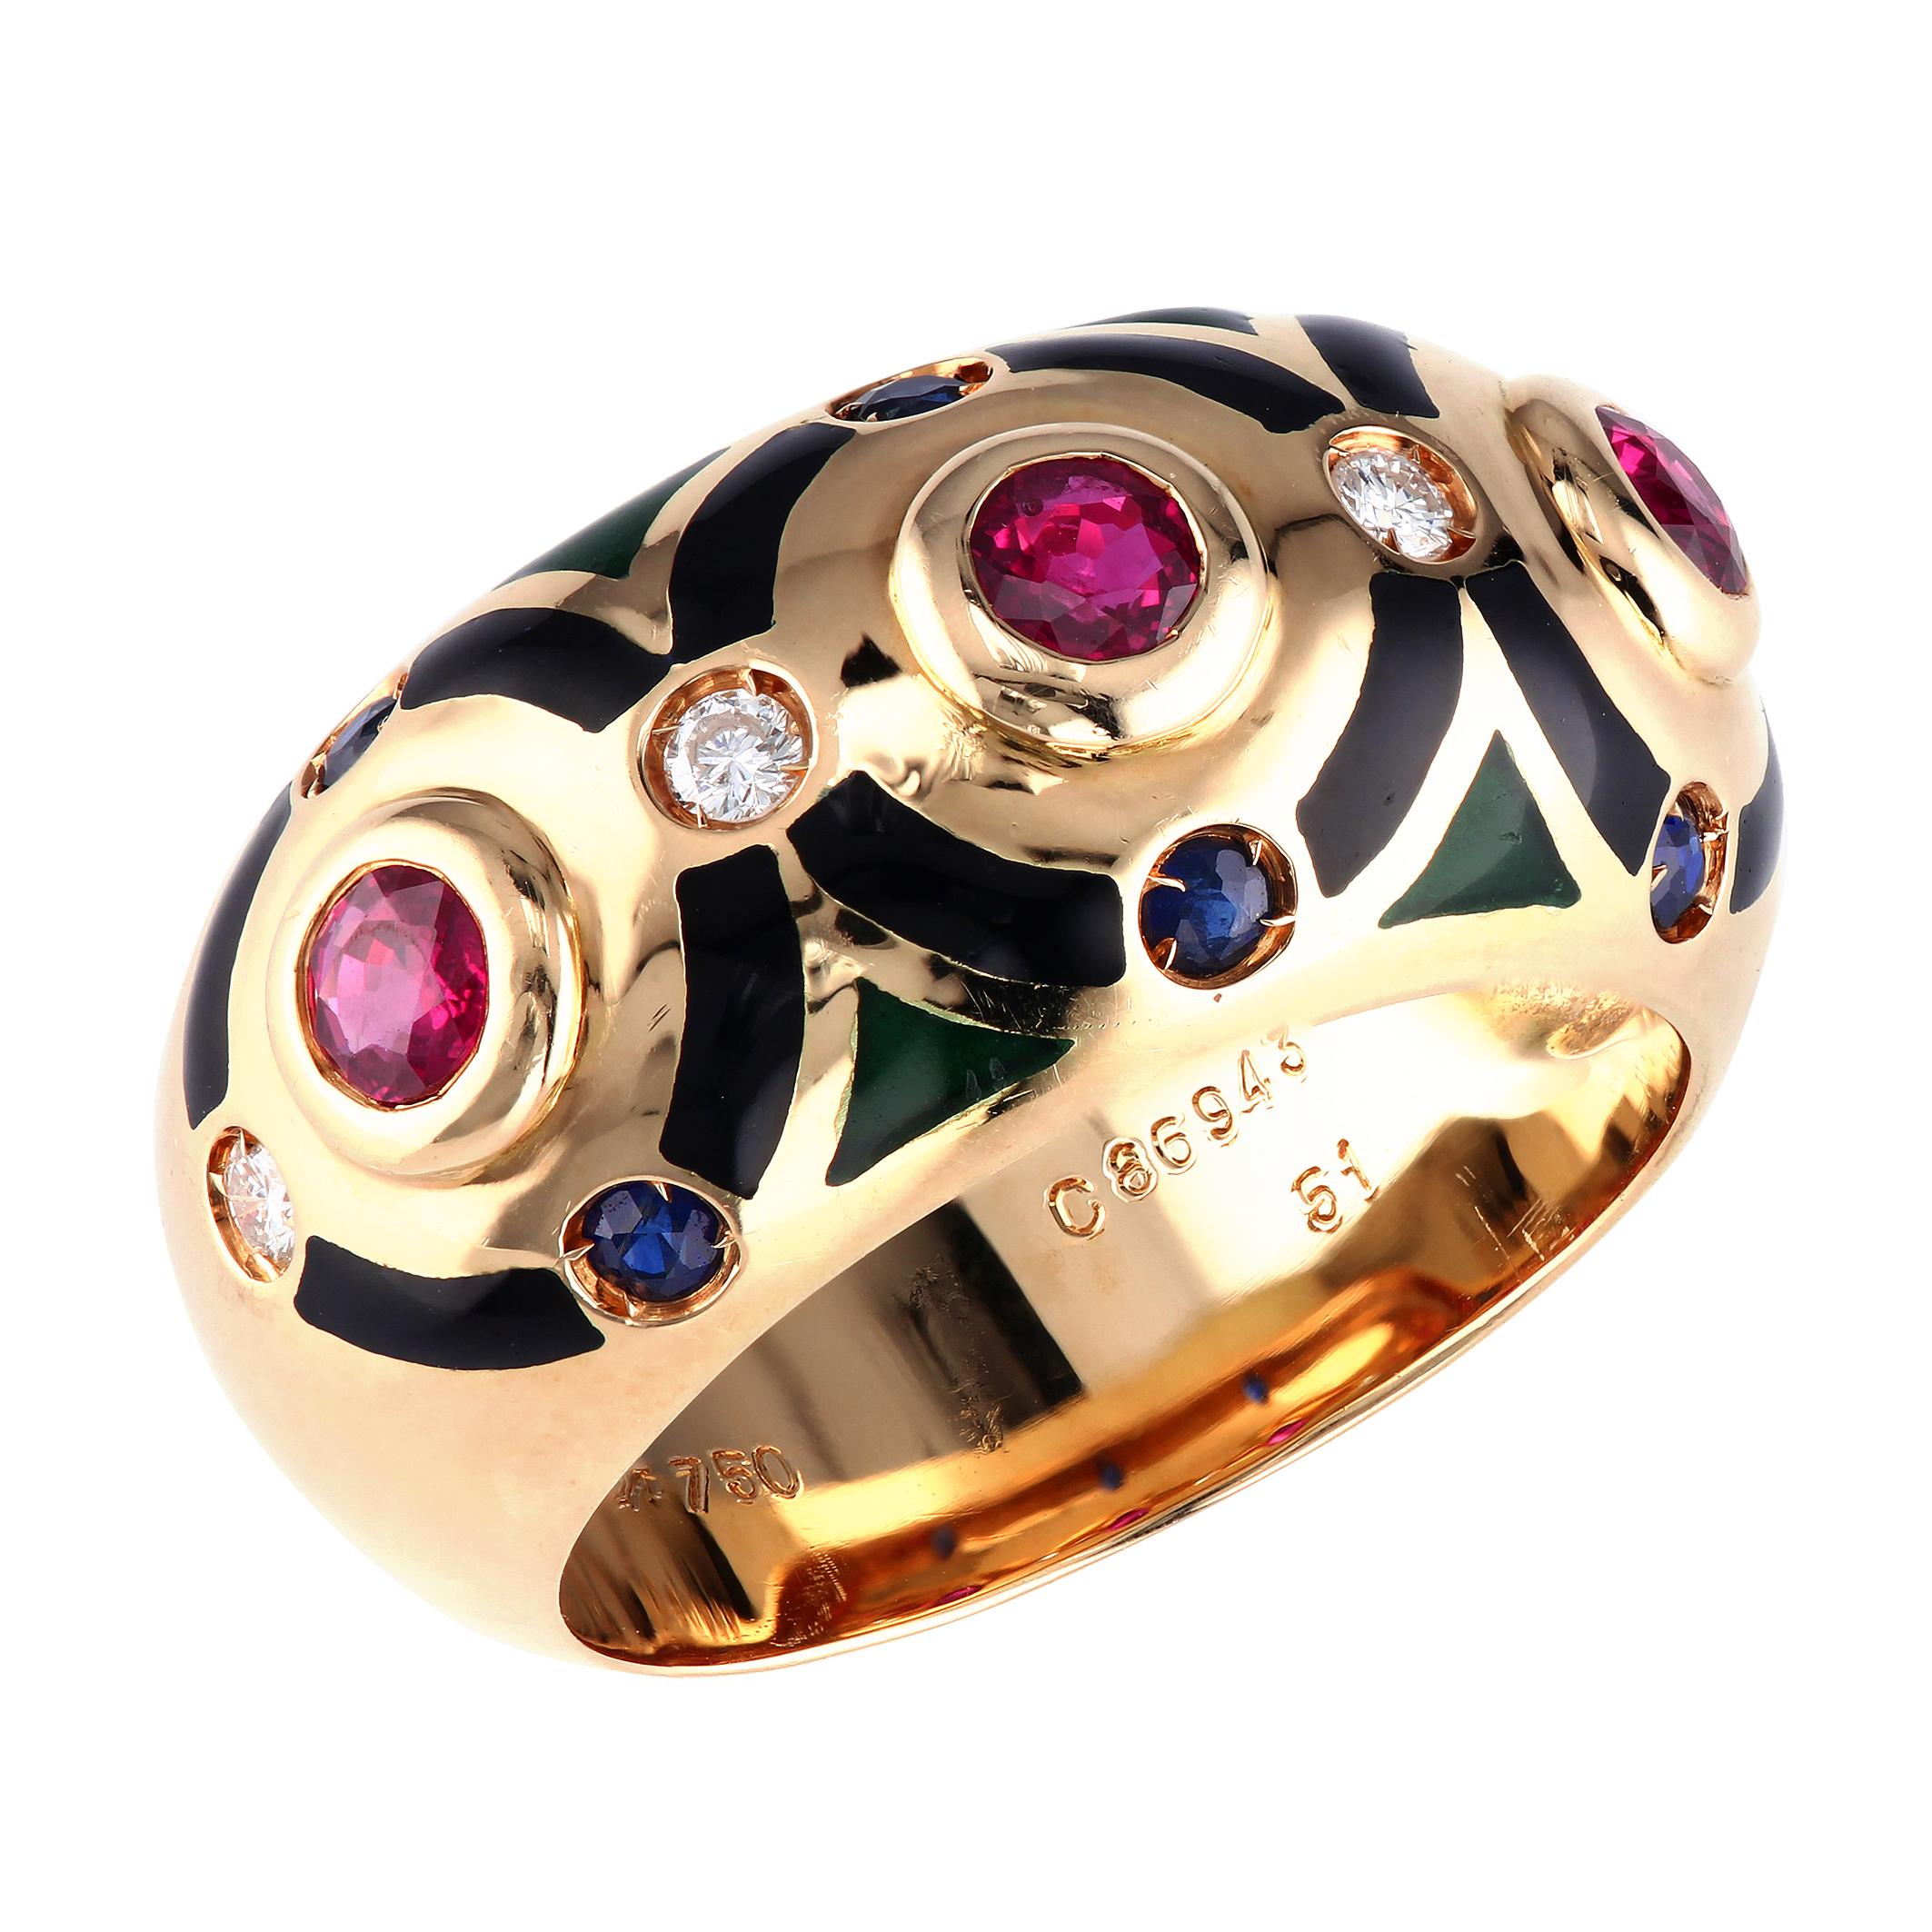 Cartier Ring with Rubies, Diamonds and Black Enamel